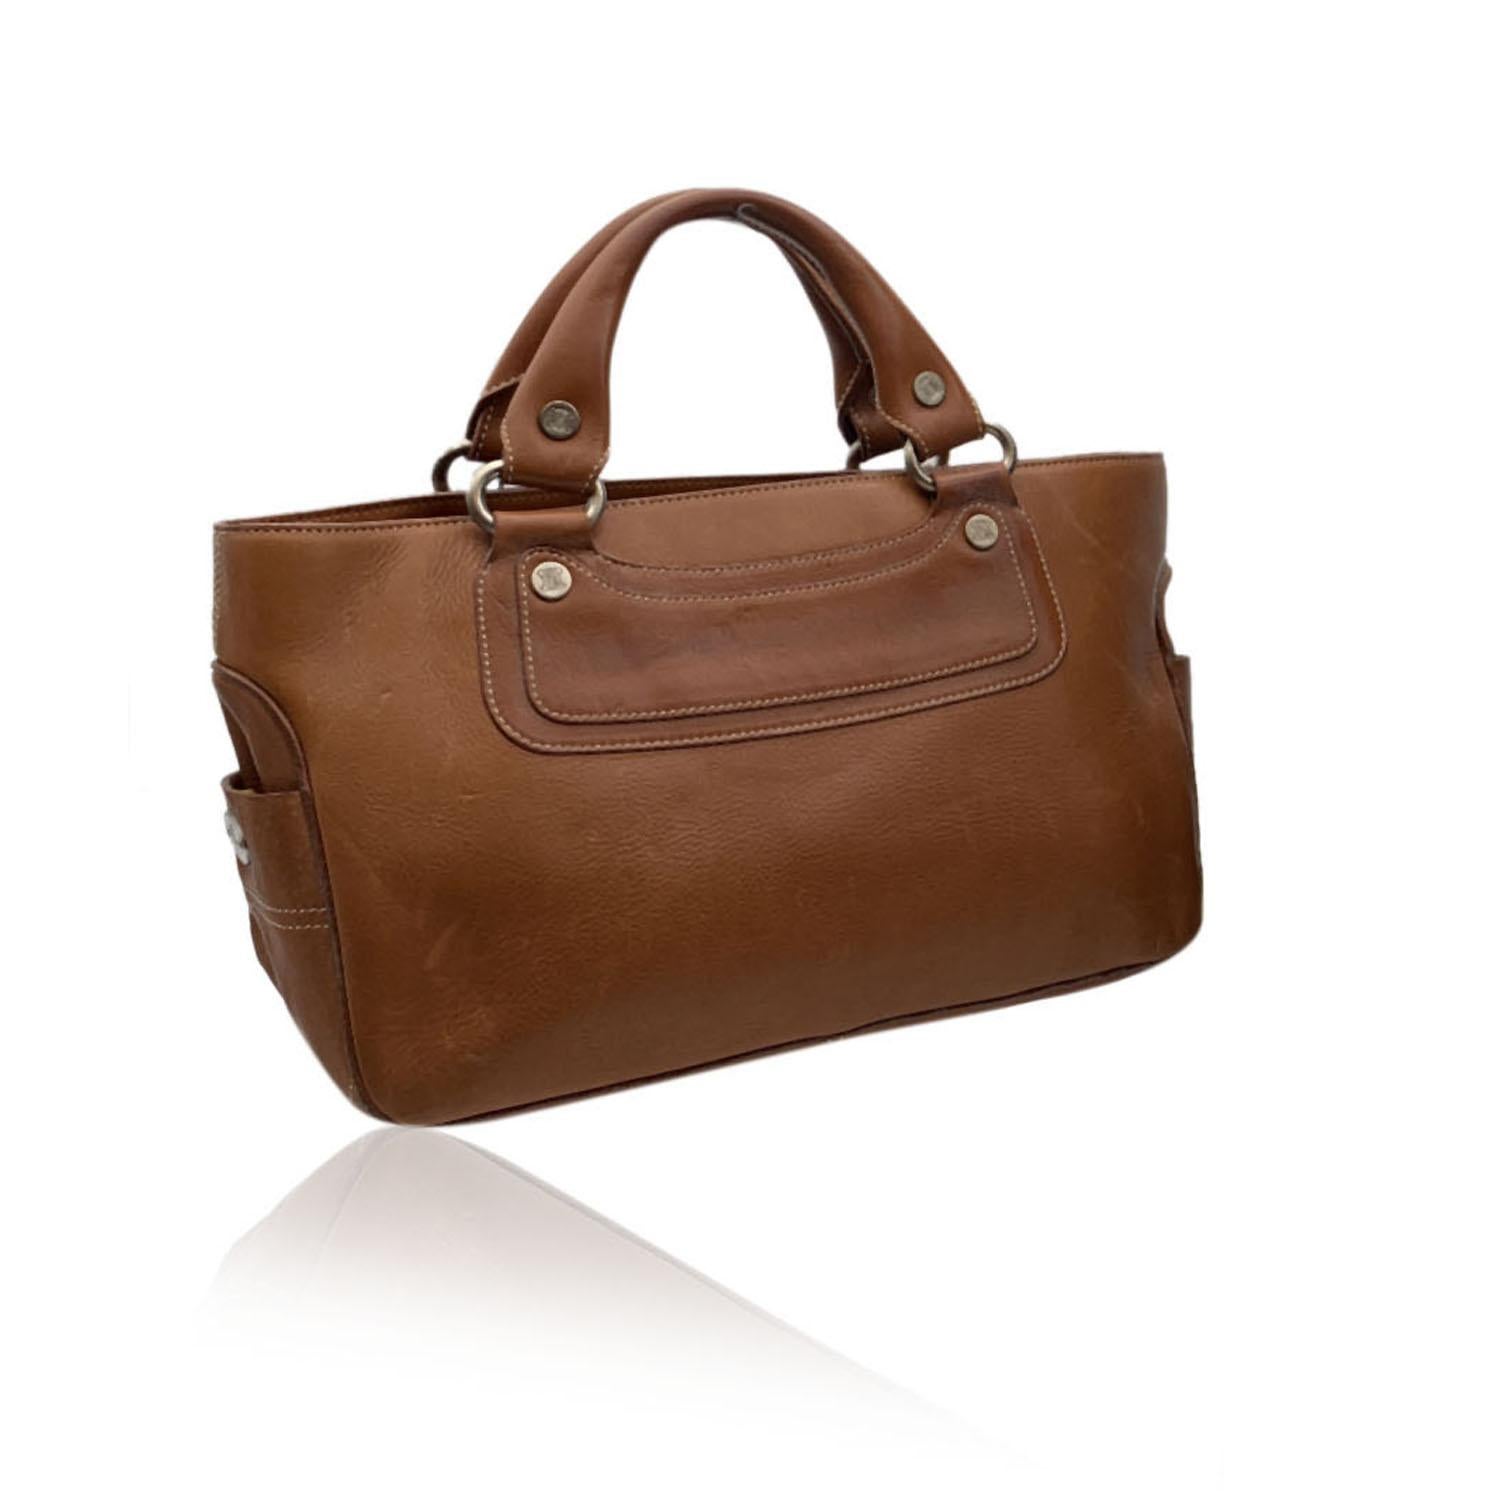 Celine light brown leather 'Boogie Bag' satchel. Silver metal hardware. Open top with 2 main compartments and 1 middle zip section. Brown lining. 2 side open pocket inside. 'Celine' tag inside.

Details

MATERIAL: Leather

COLOR: Brown

MODEL: